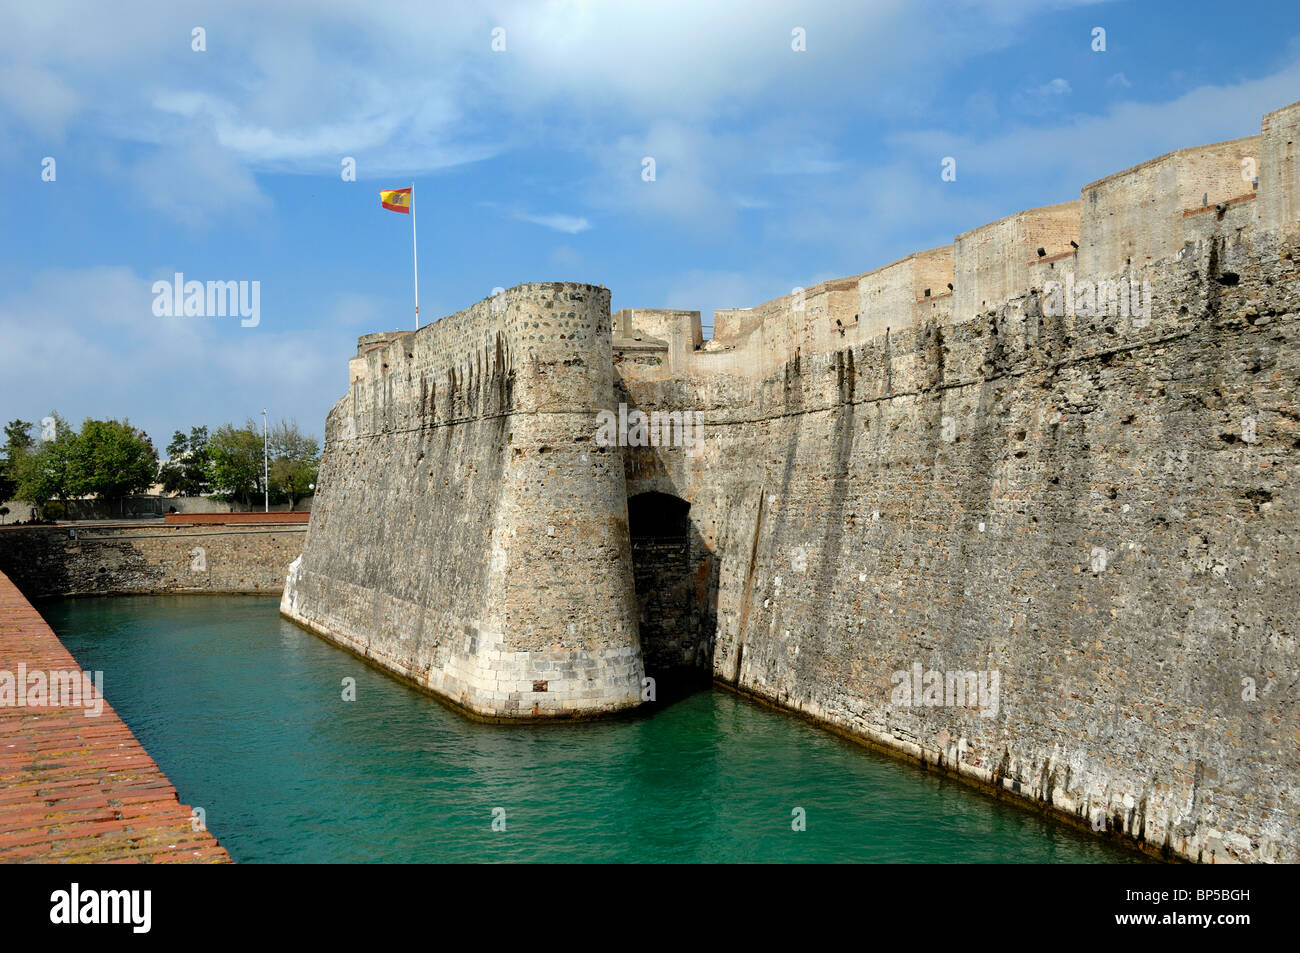 Medieval City Walls or Royal Walls of Ceuta, Murallas Reales (962-c18th) Fortress & Moat, Ceuta, Spain Stock Photo